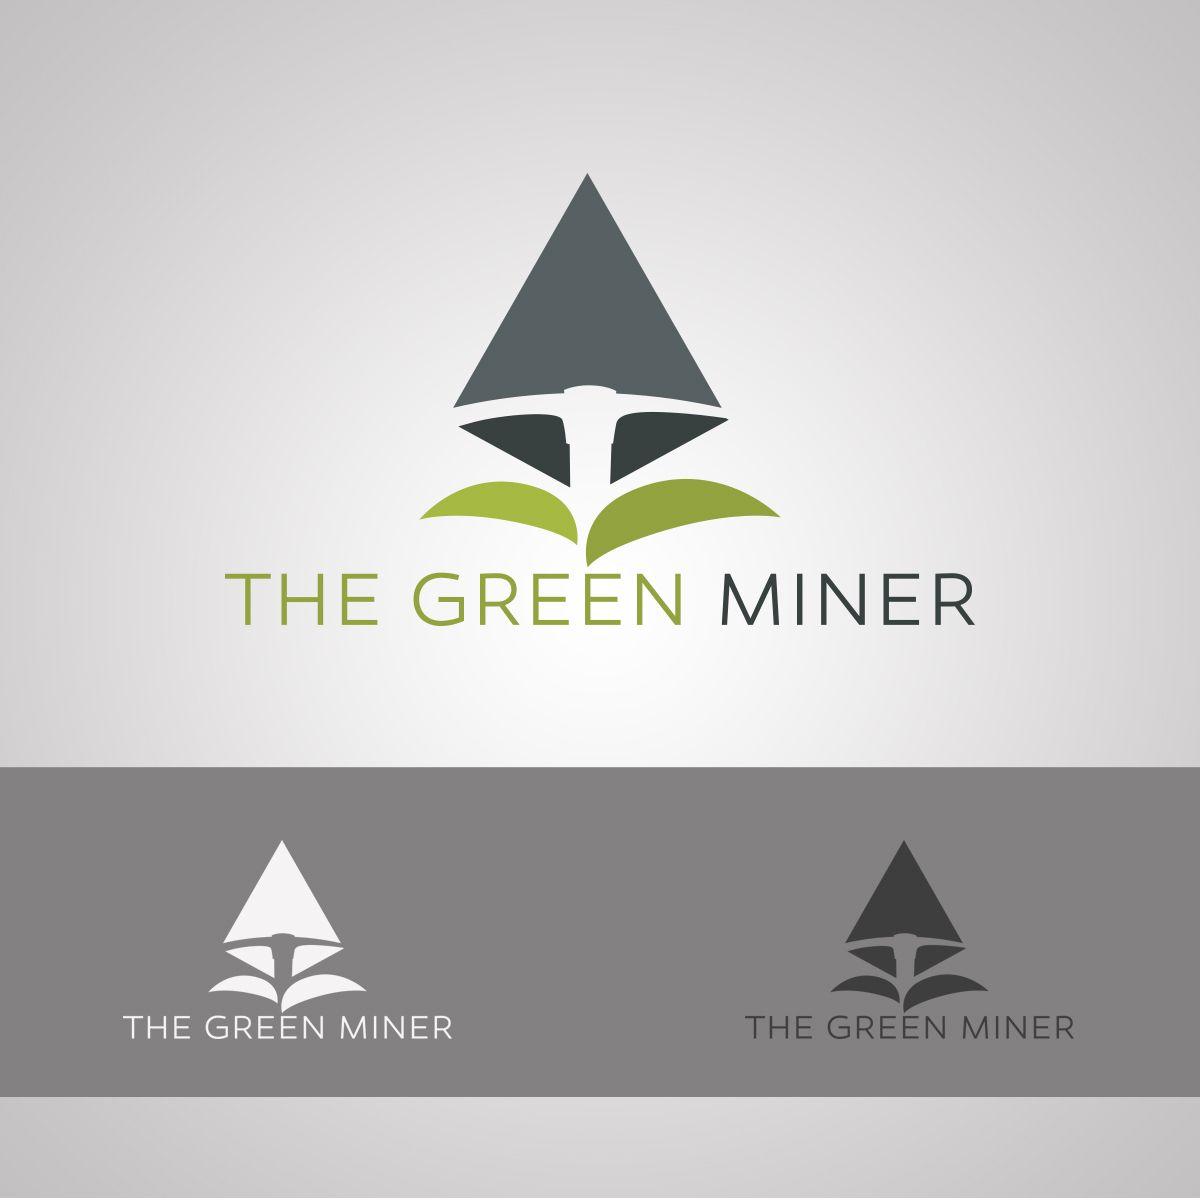 Green Triangle Company Logo - Modern, Bold, It Company Logo Design for The Green Miner by 21.owl